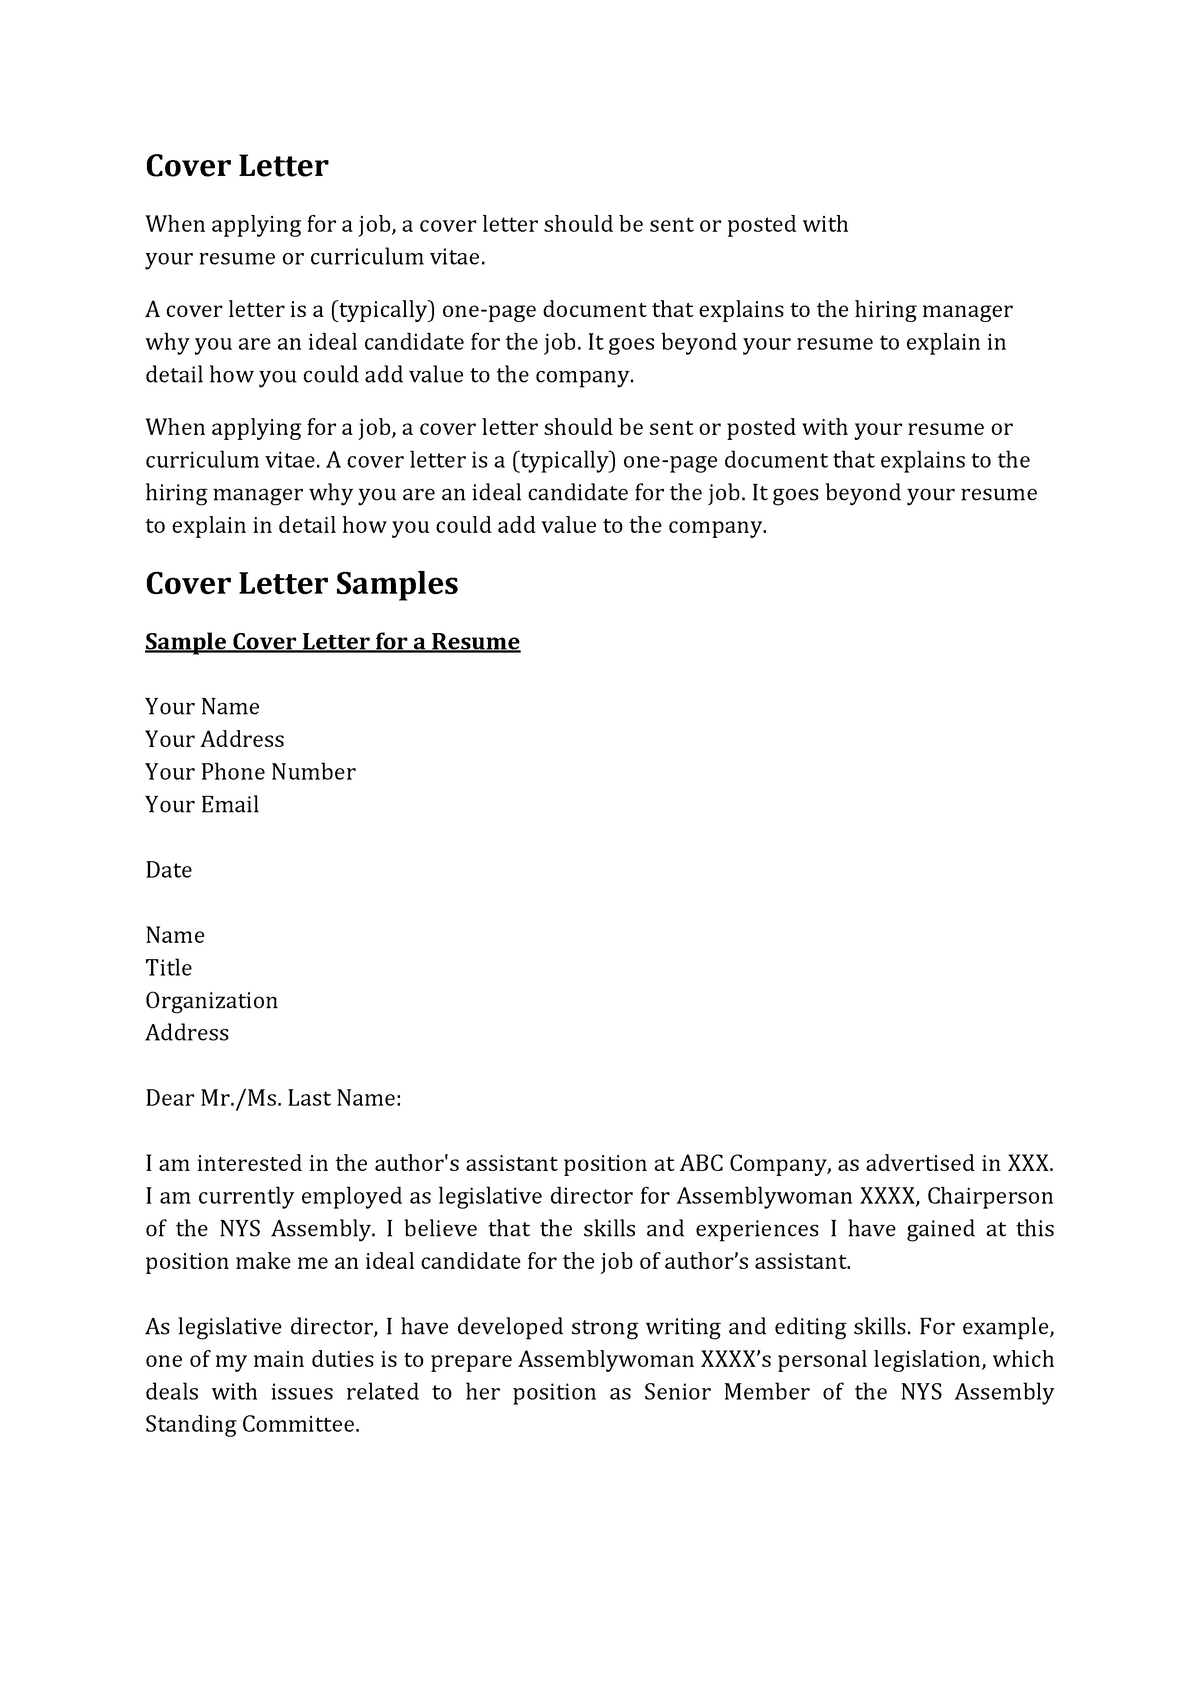 cover letter template malaysia